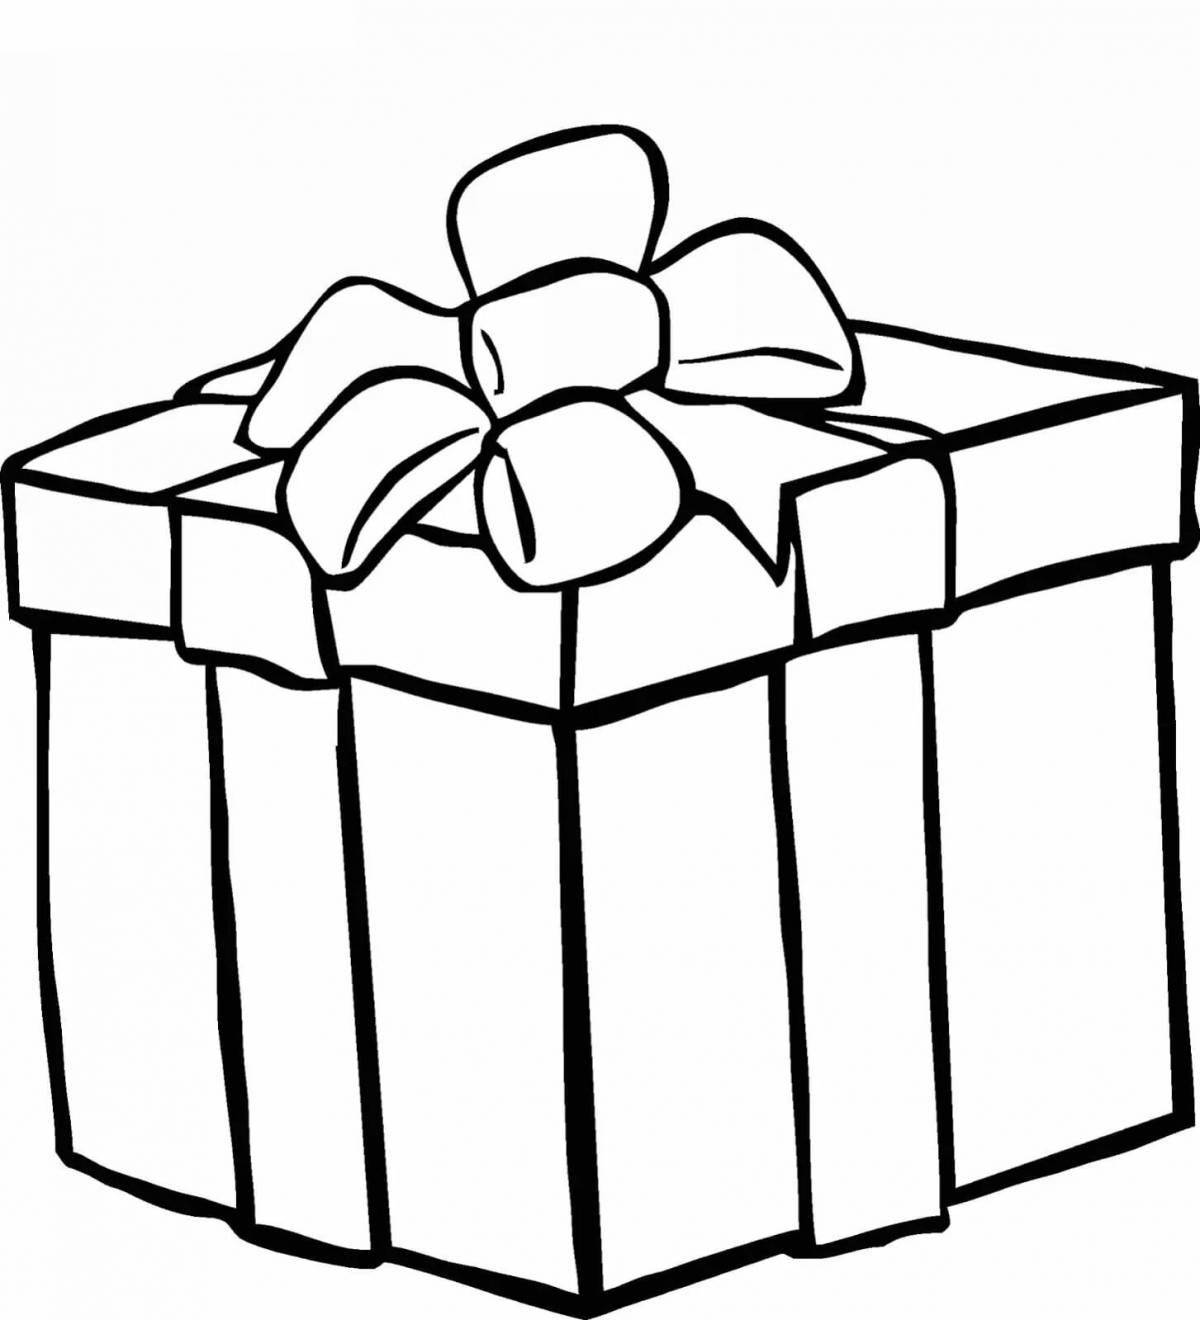 Fat box coloring page